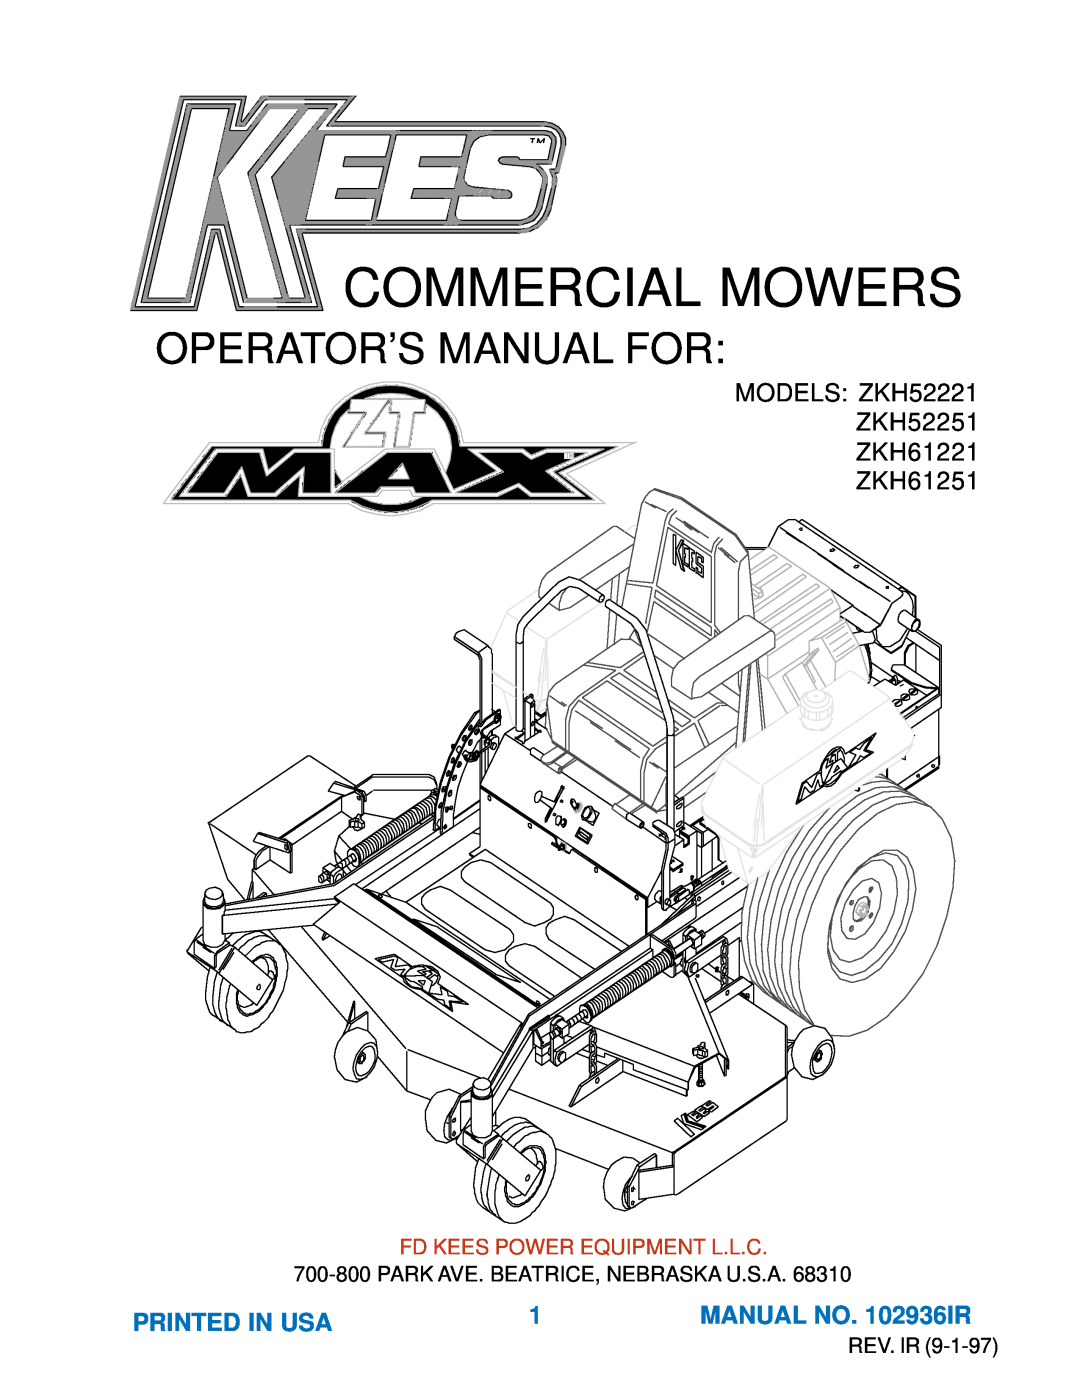 Yazoo/Kees ZKH61221, ZKH61251 manual Printed In Usa, MANUAL NO. 102936IR, Commercial Mowers, Operator’S Manual For 